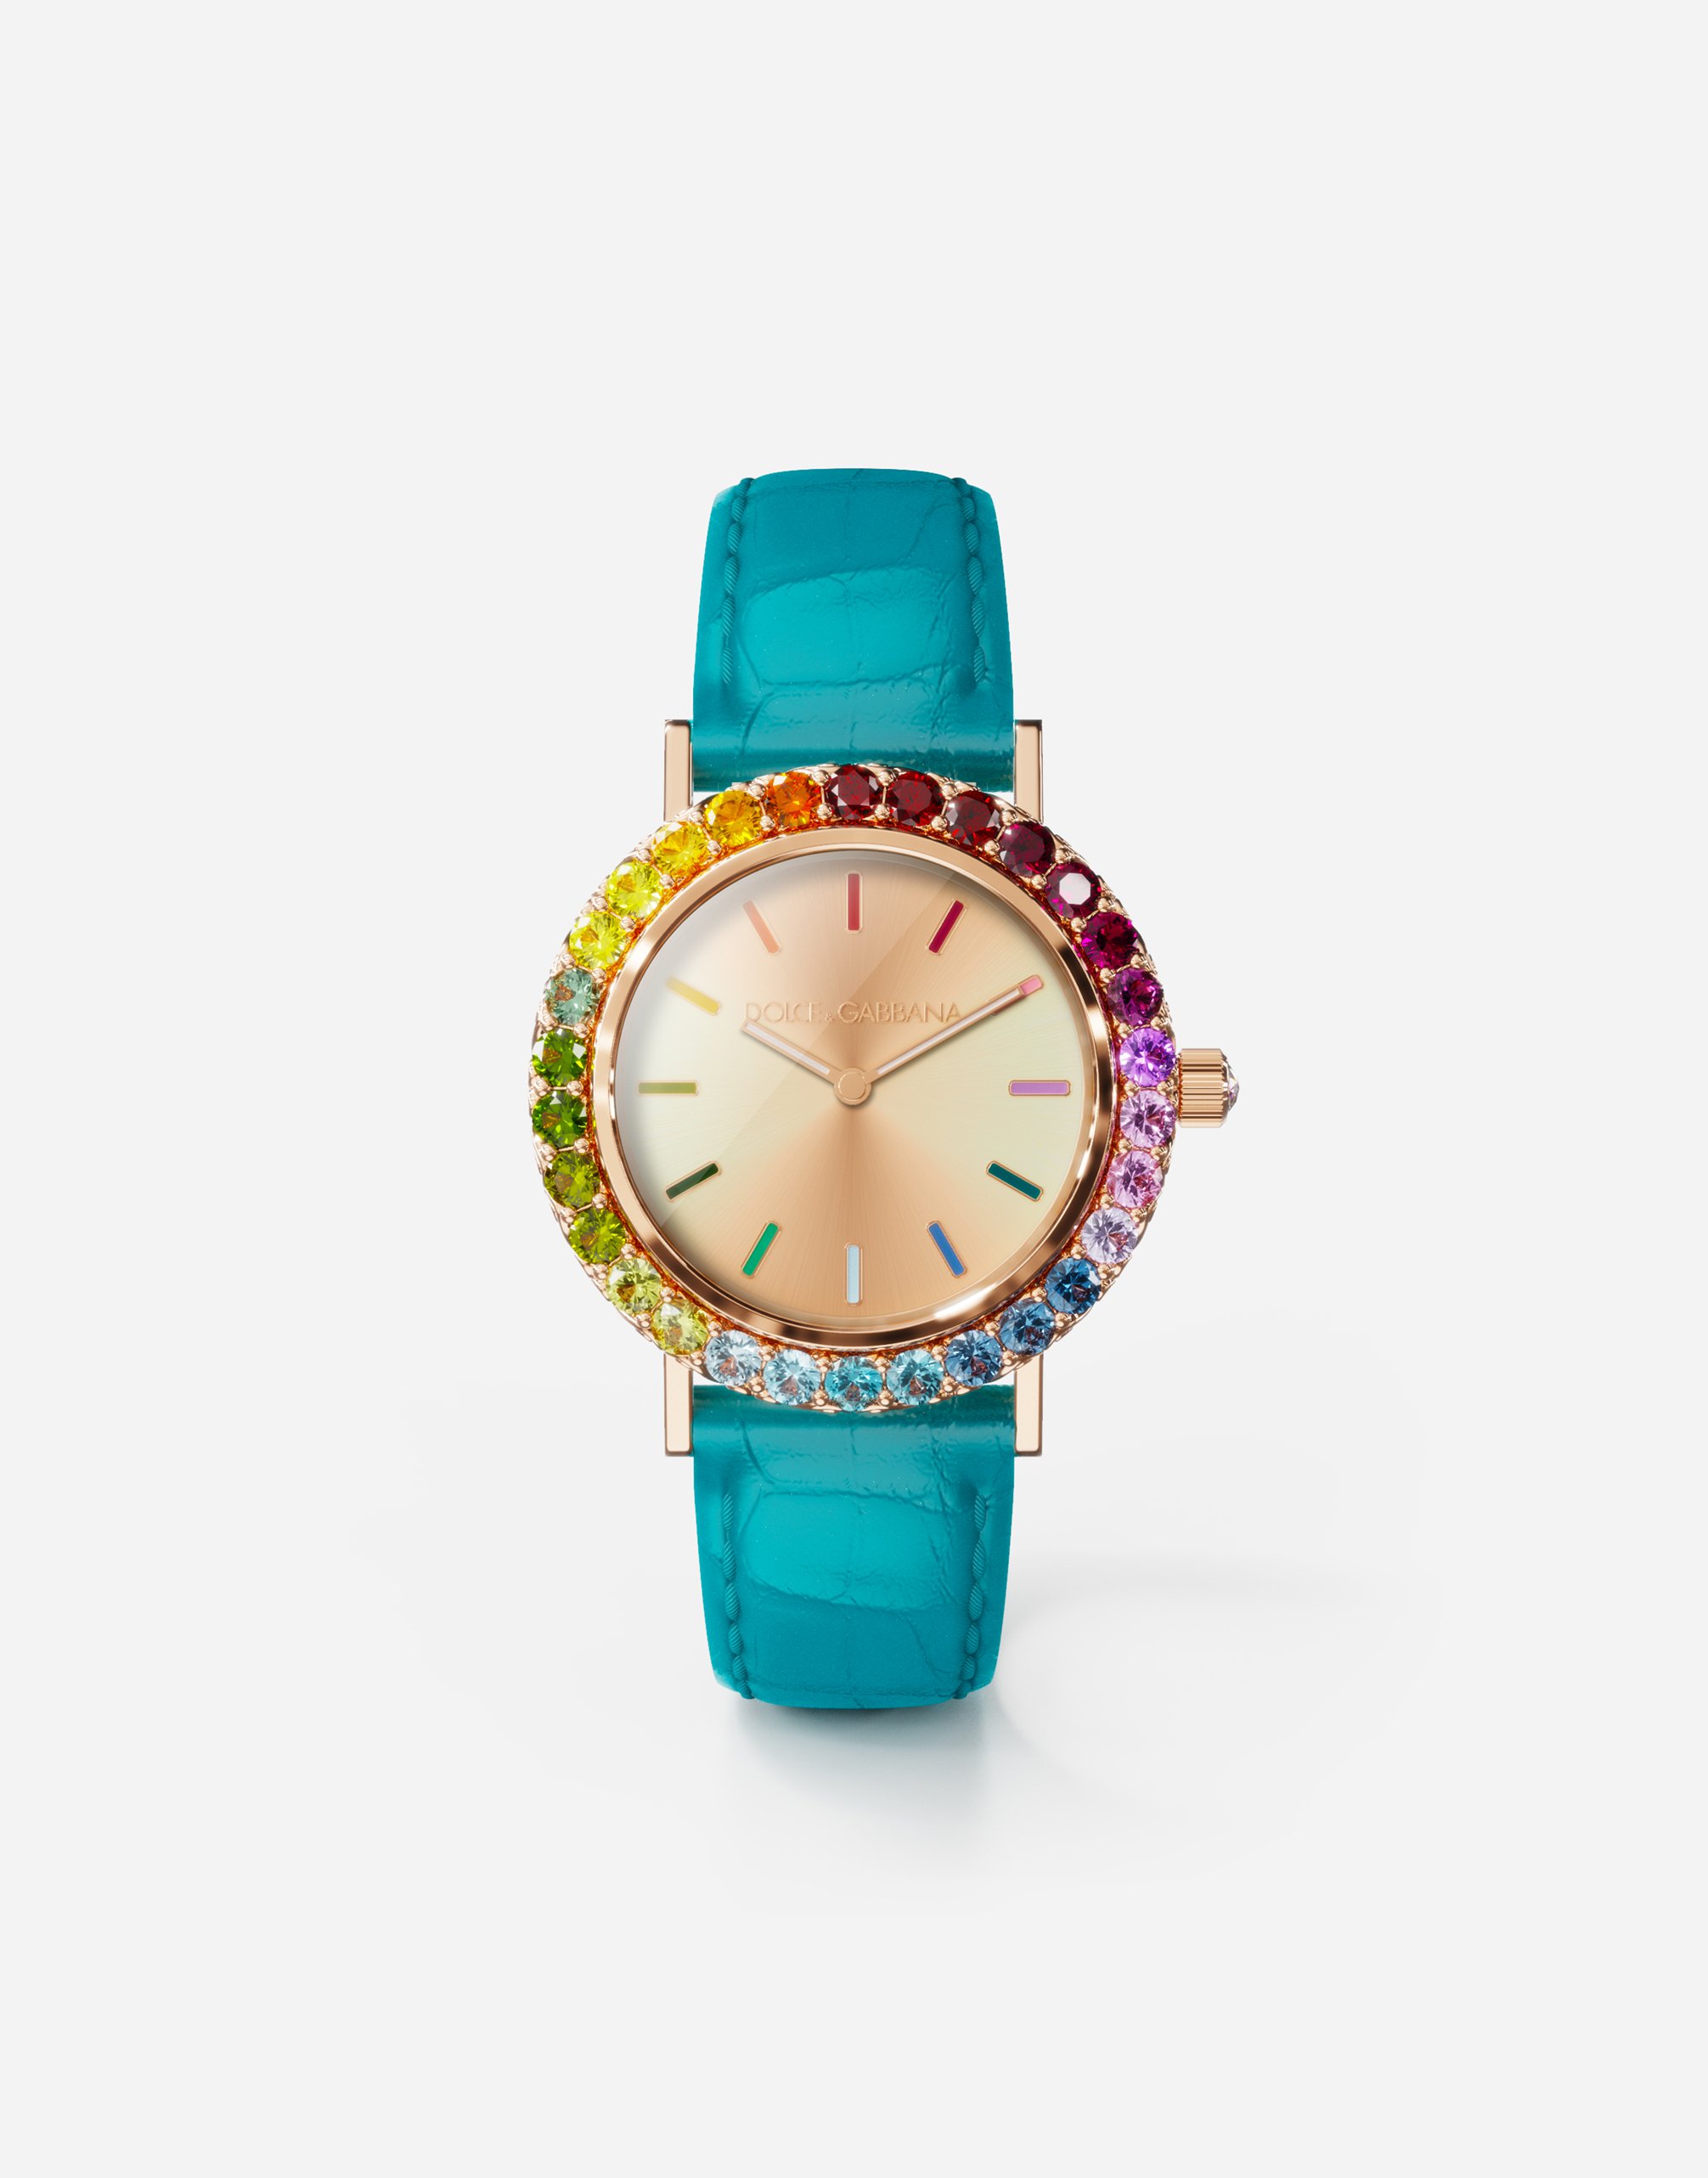 Iris watch in Turquoise